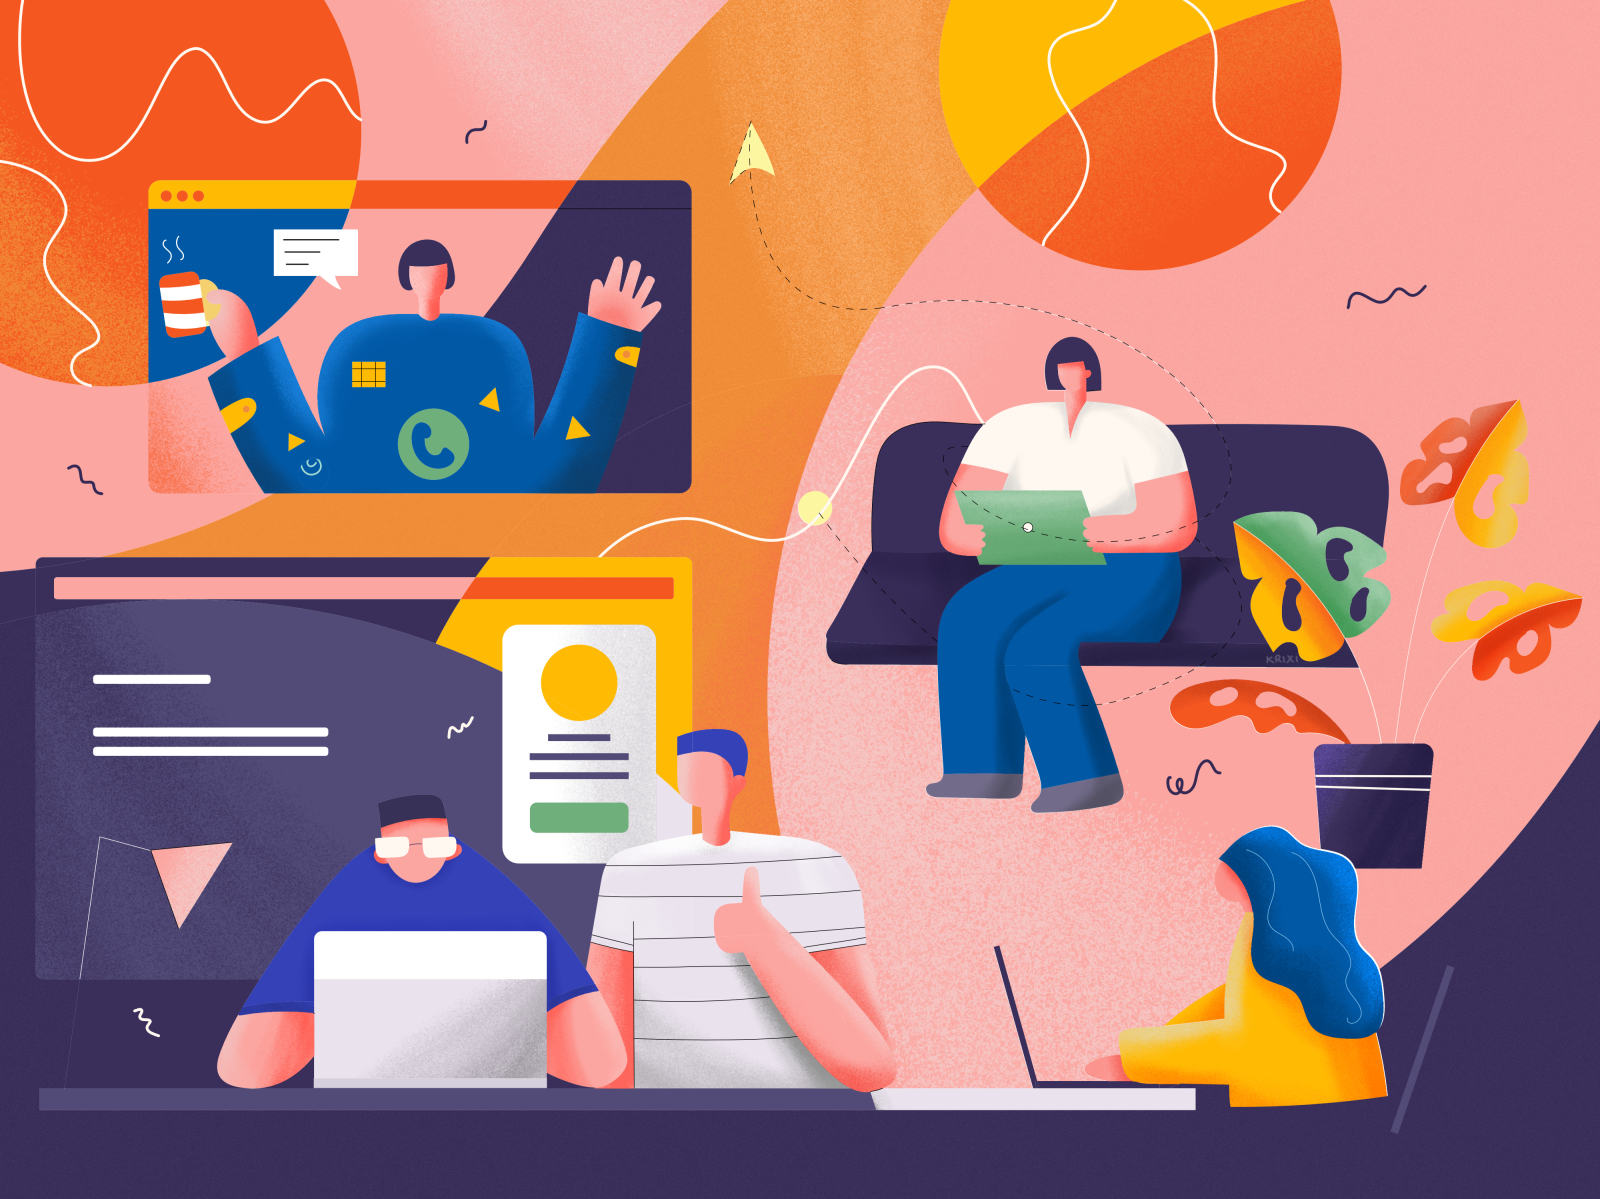 Working as a team appreciation character character design clean couch desk desktop facetime illustration illustration agency illustrator krixi lamp laptop office remote sofa talking tree website